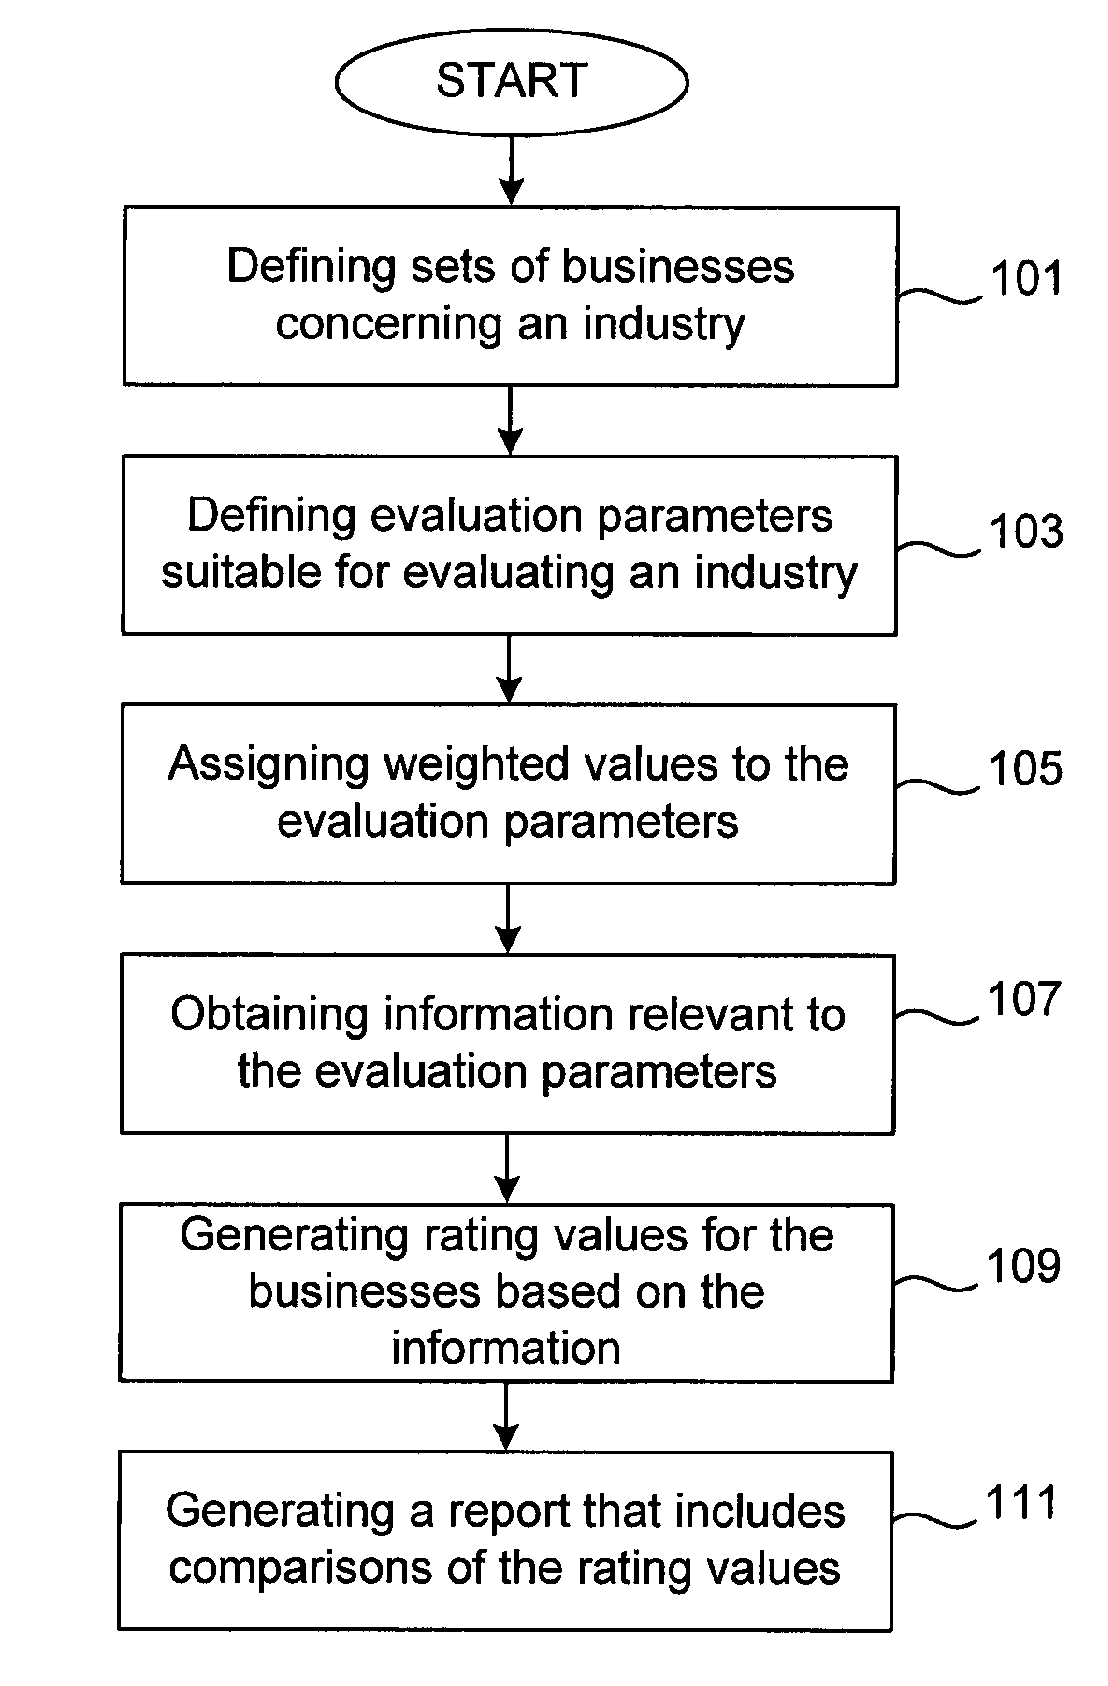 Method for evaluating, analyzing, and benchmarking business sales performance